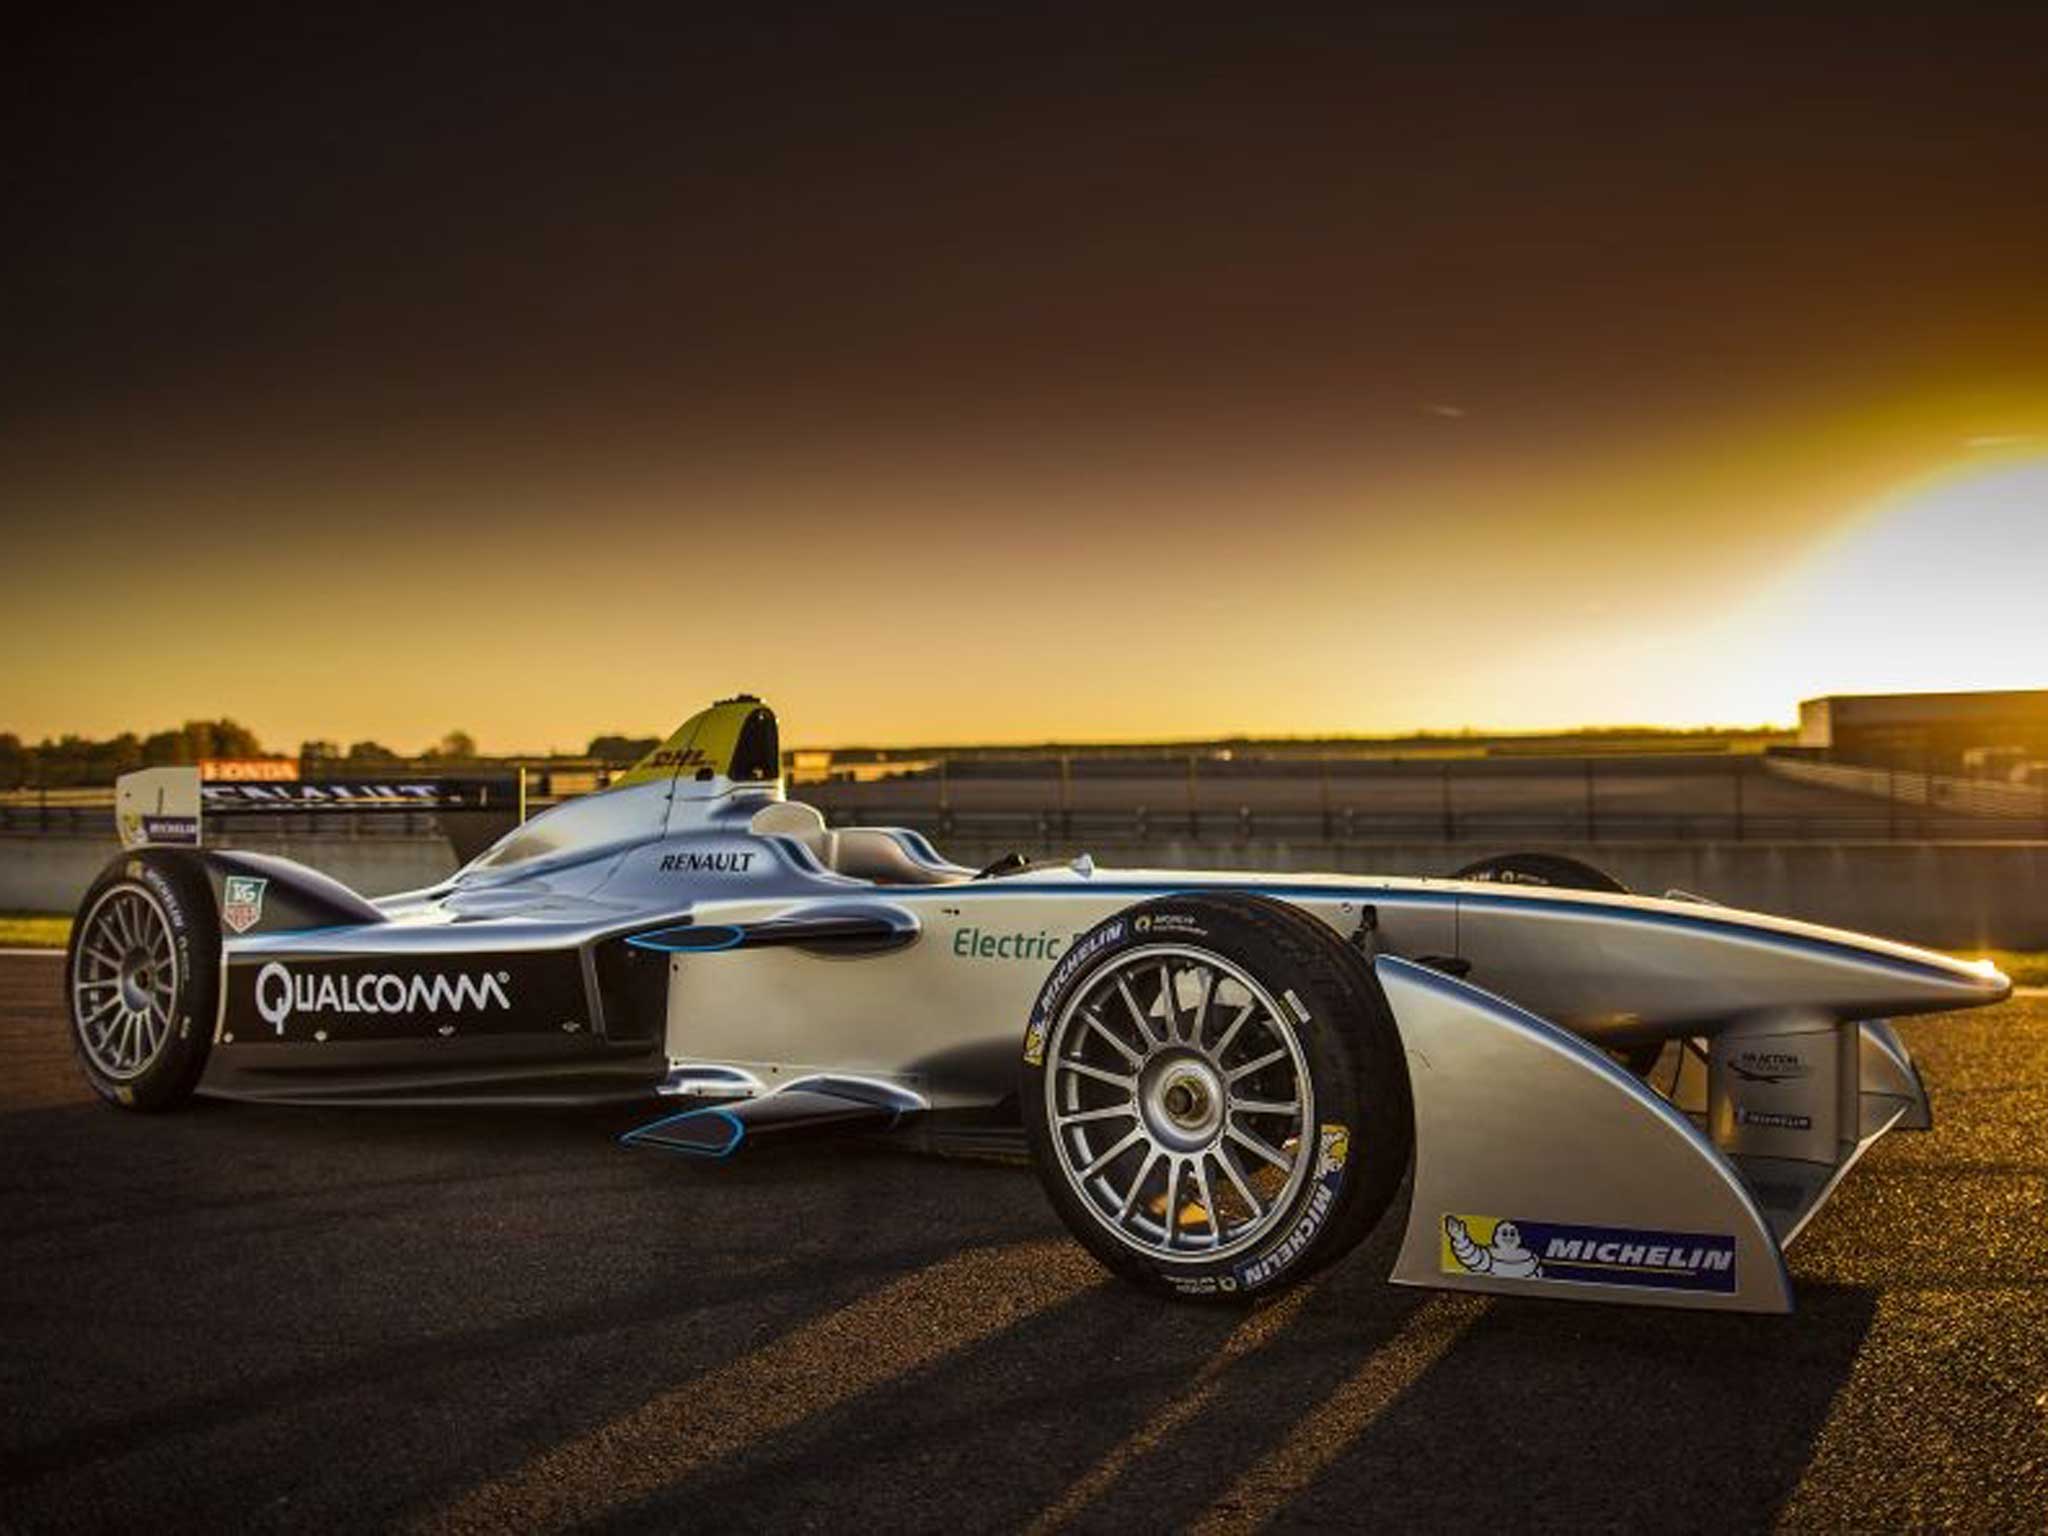 On the grid: Formula E championship races will ‘push electric cars into the mainstream’